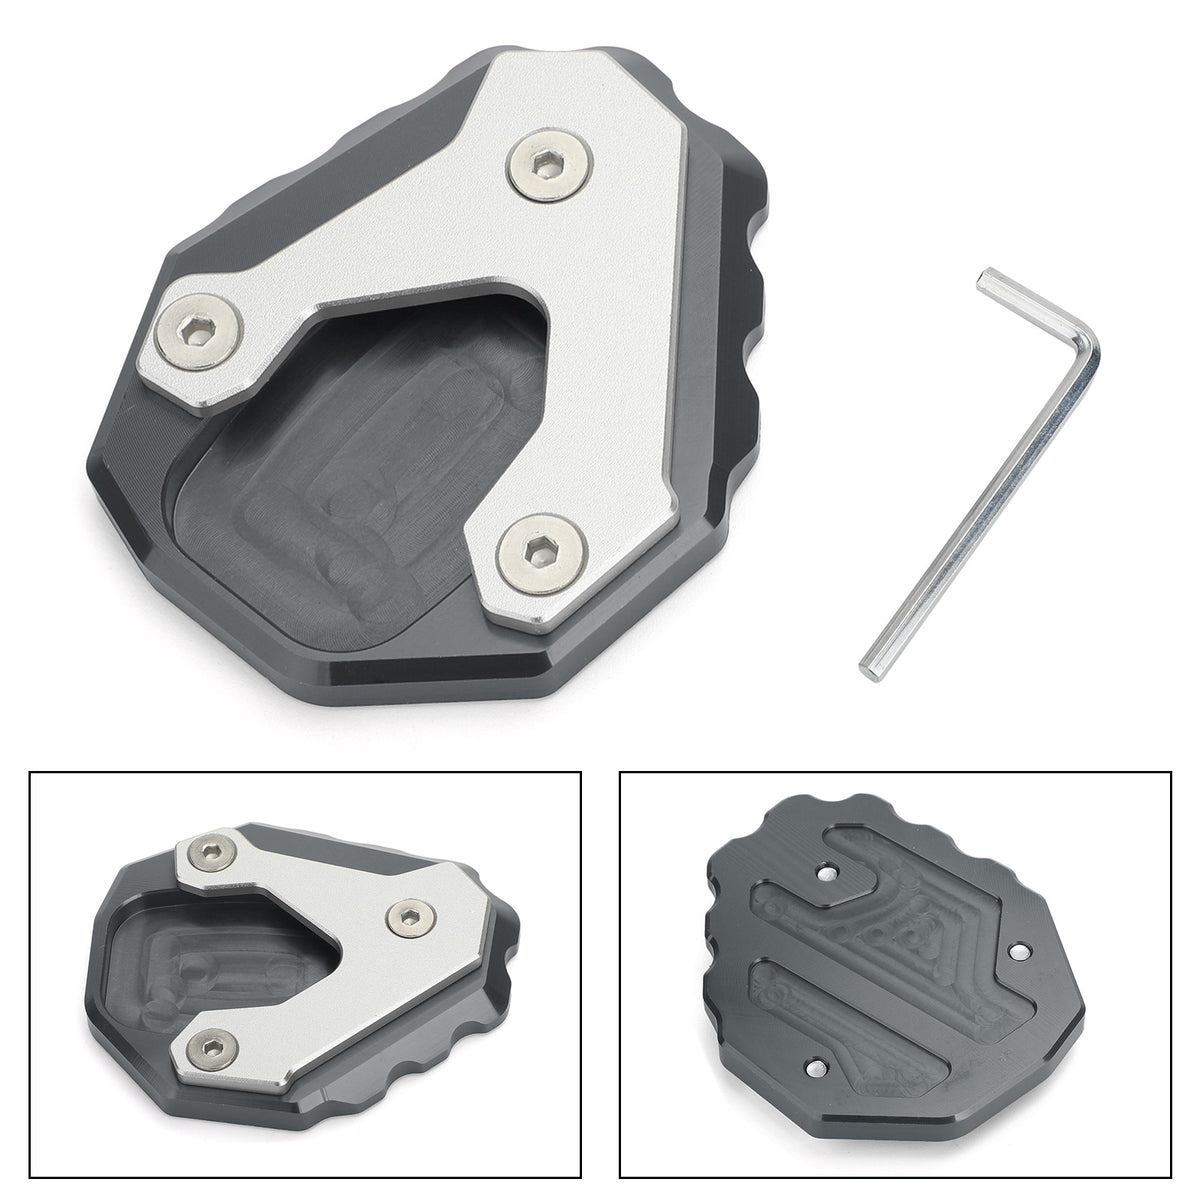 Side Stand Extension Kickstand Enlarger Plate For HONDA CB500X 2019 Titanium